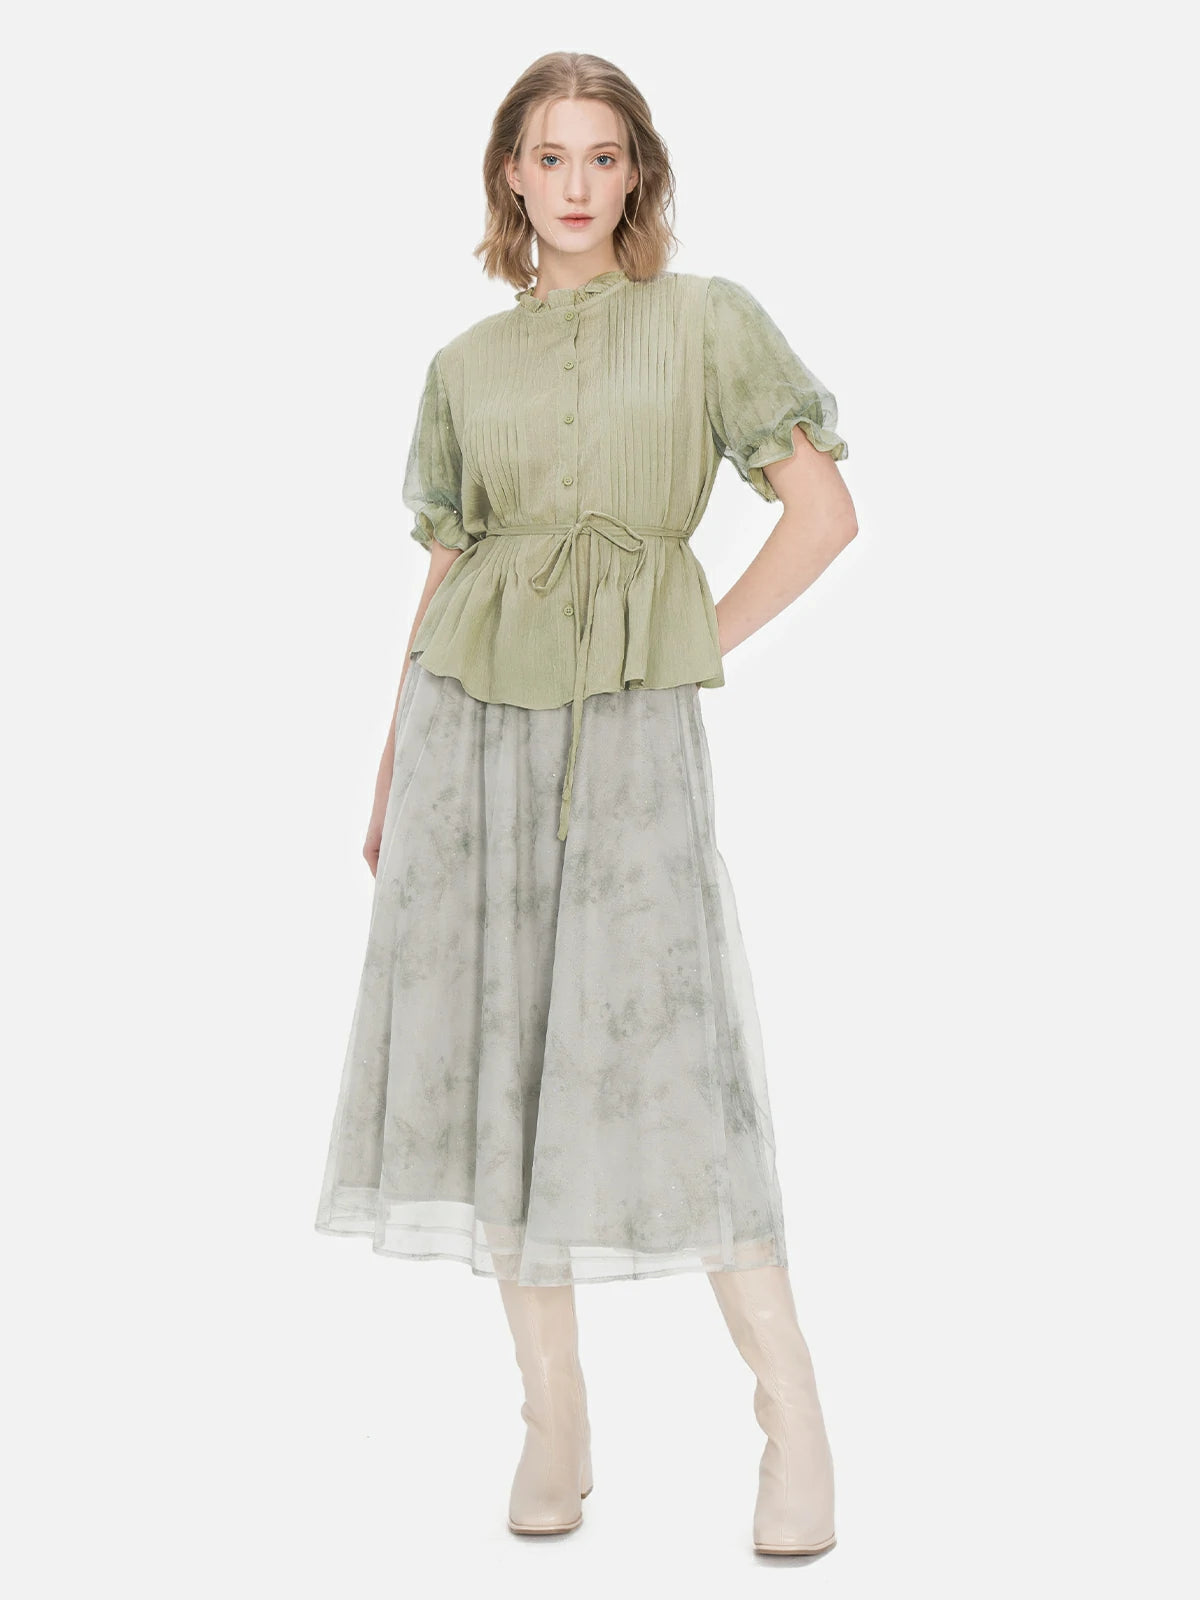 An elegant green short-sleeved blouse featuring a unique accordion pleat design, mesh bubble sleeves, and waist tie for a distinctive look.